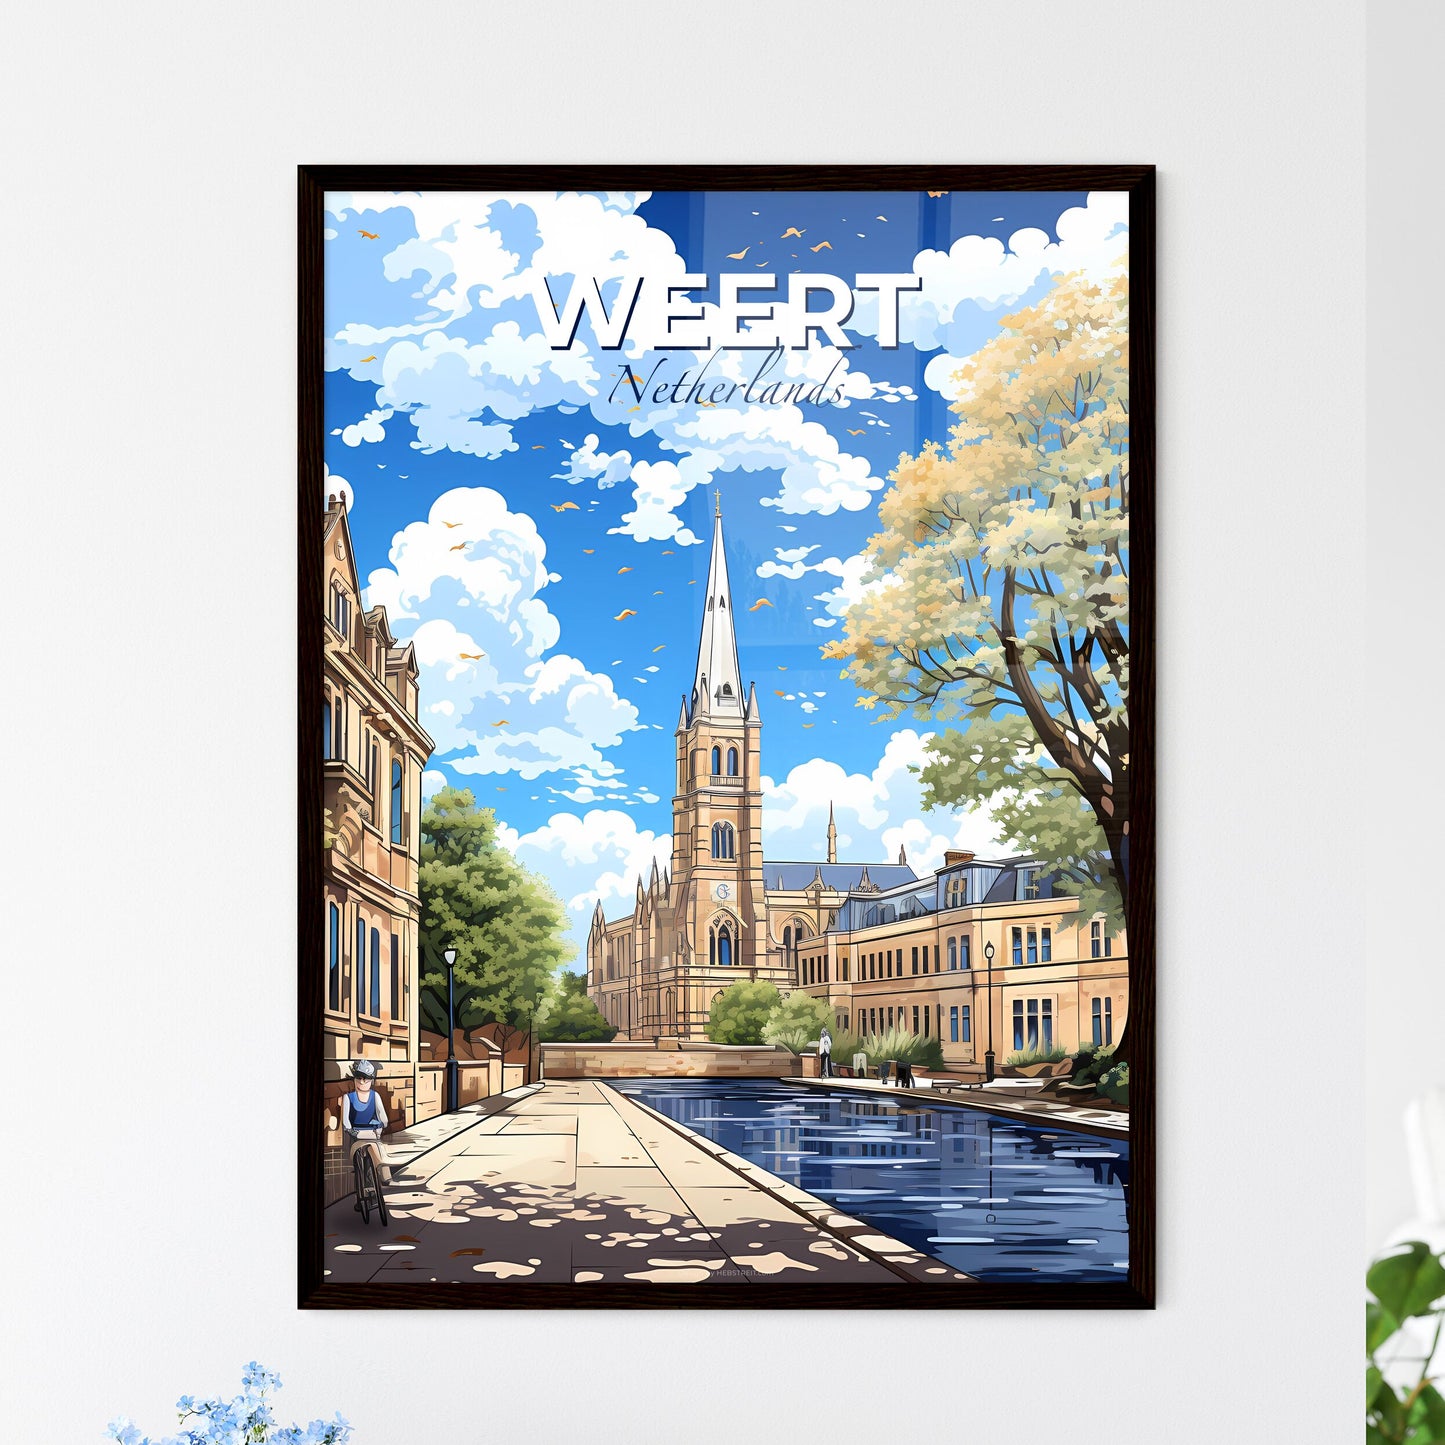 Weert, Netherlands, A Poster of a building with a clock tower and a pond Default Title